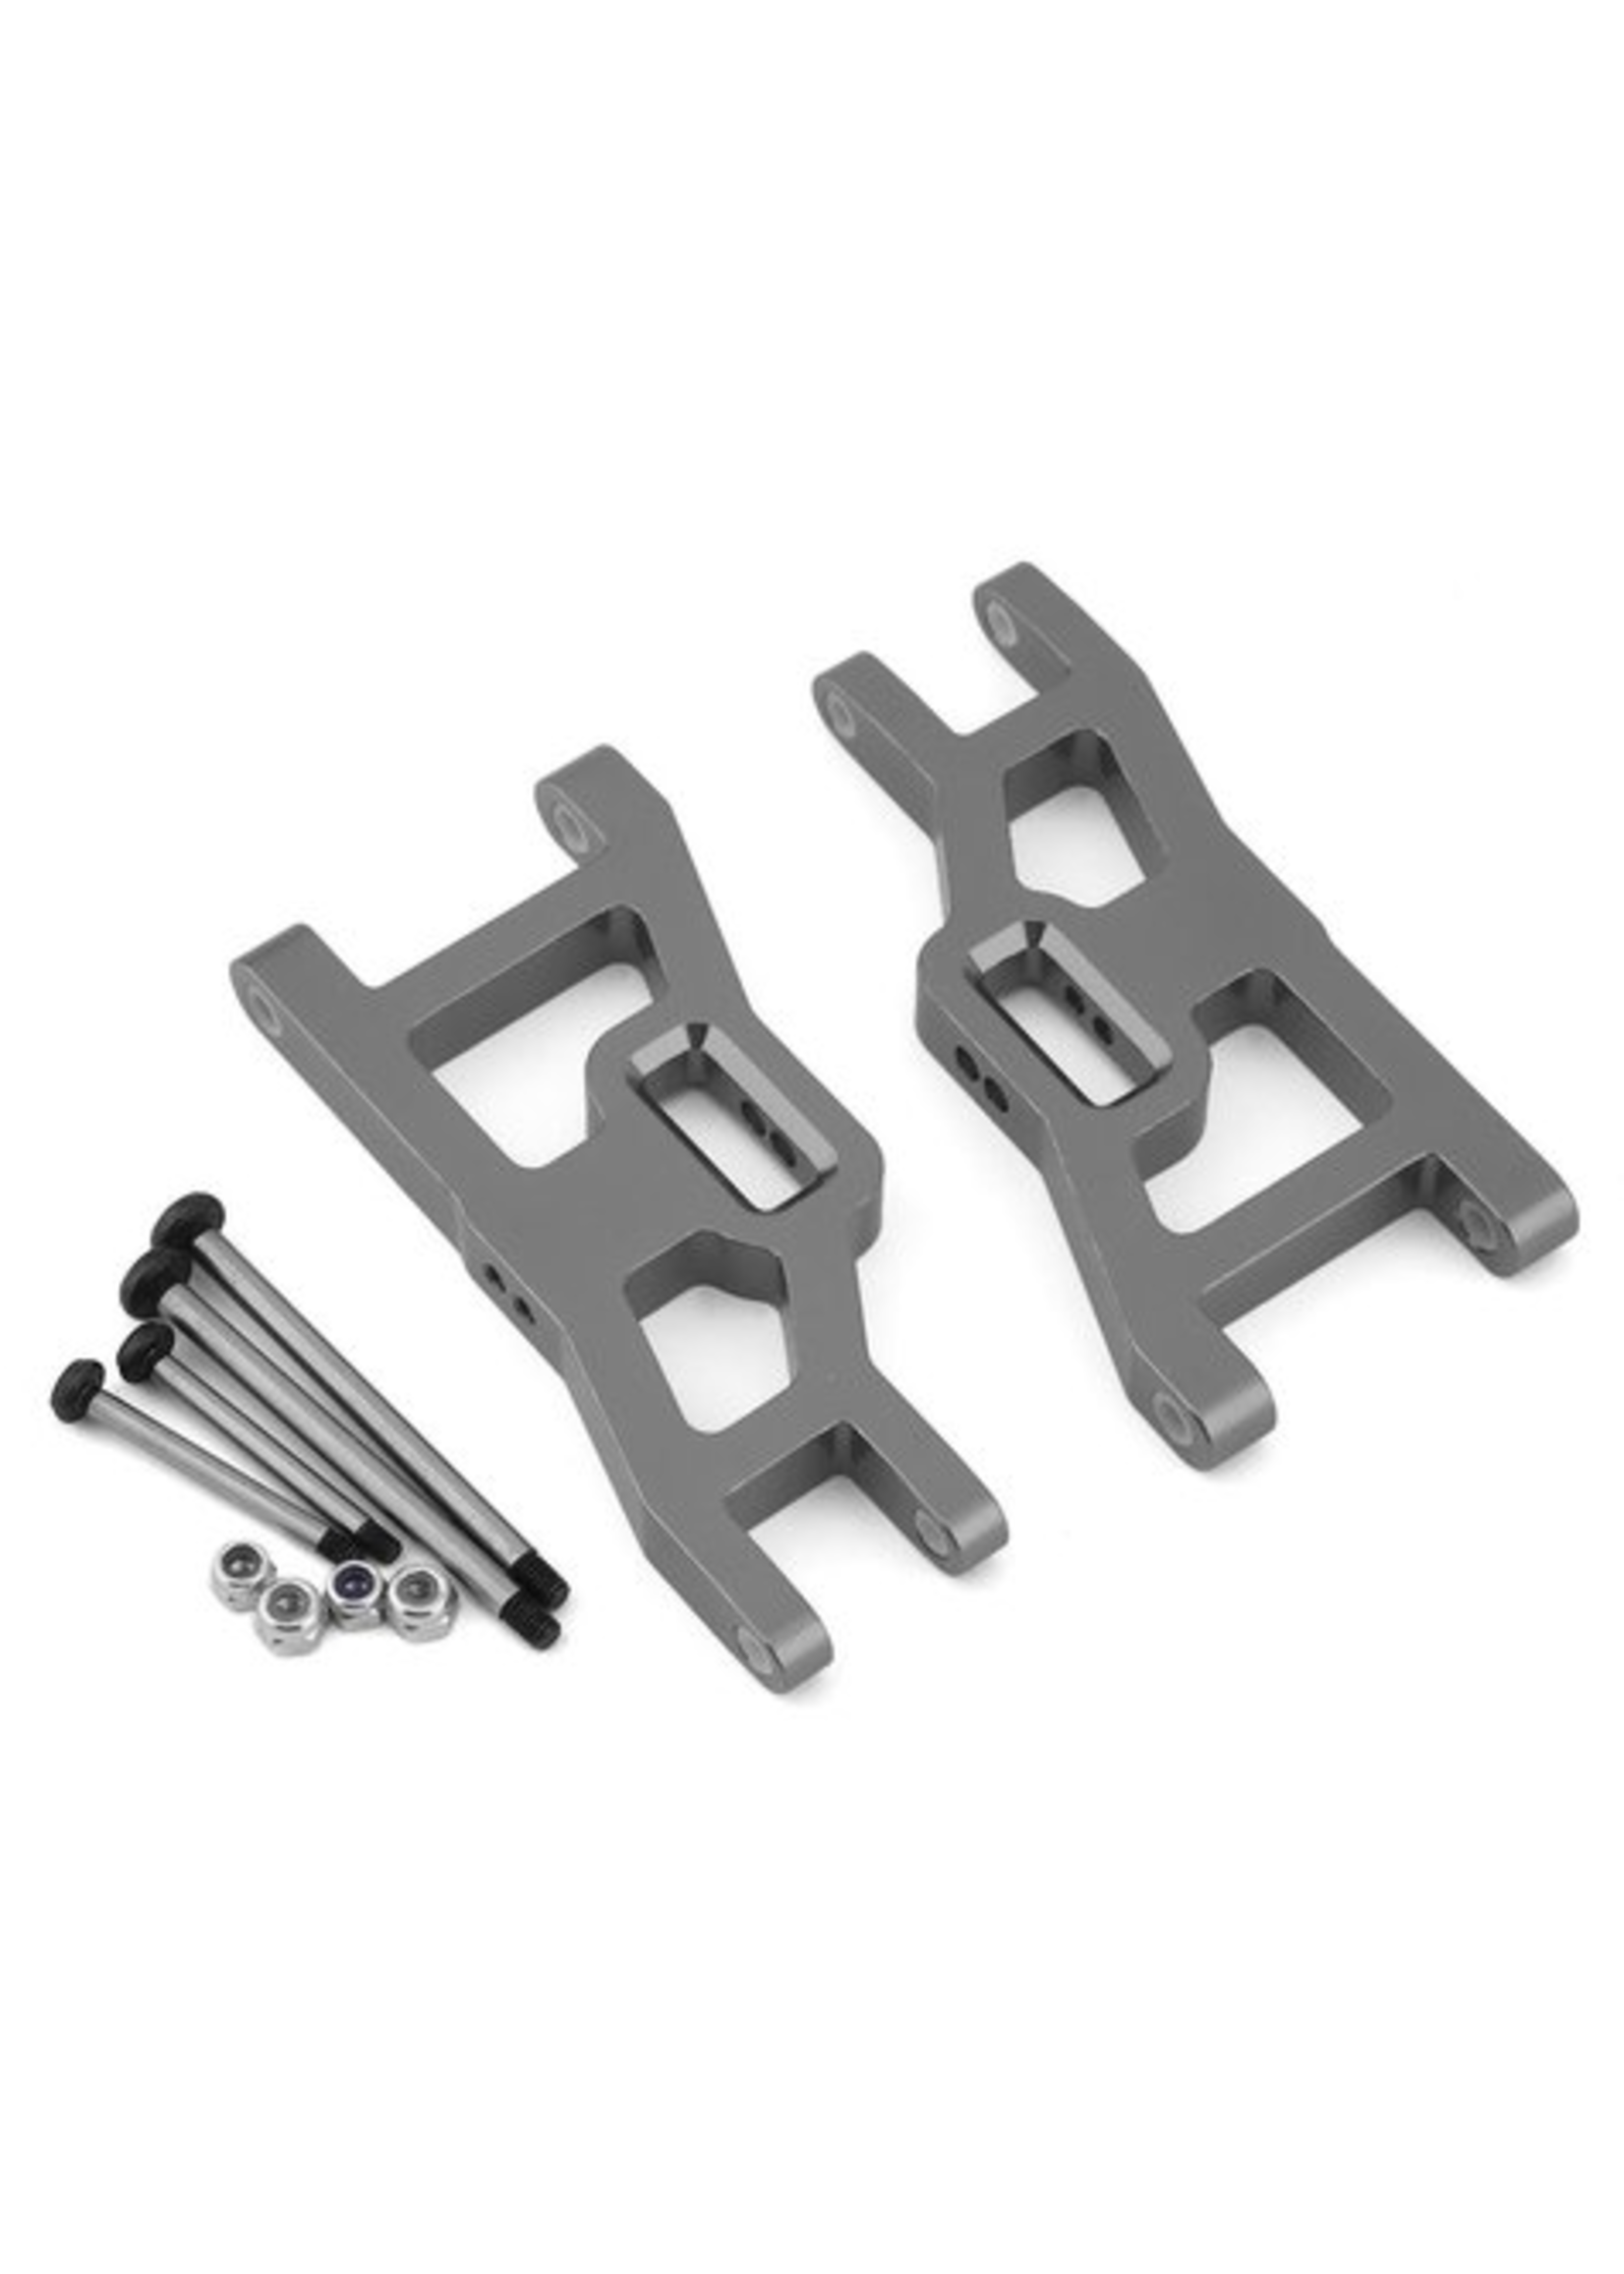 ST Racing Concepts SPTST3631XGM ST Racing Concepts Green Heavy Duty Front Suspension Arms Kit w/ Lock-Nut Hinge-Pins, for Traxxas Rustler/Stampede (Gun Metal)